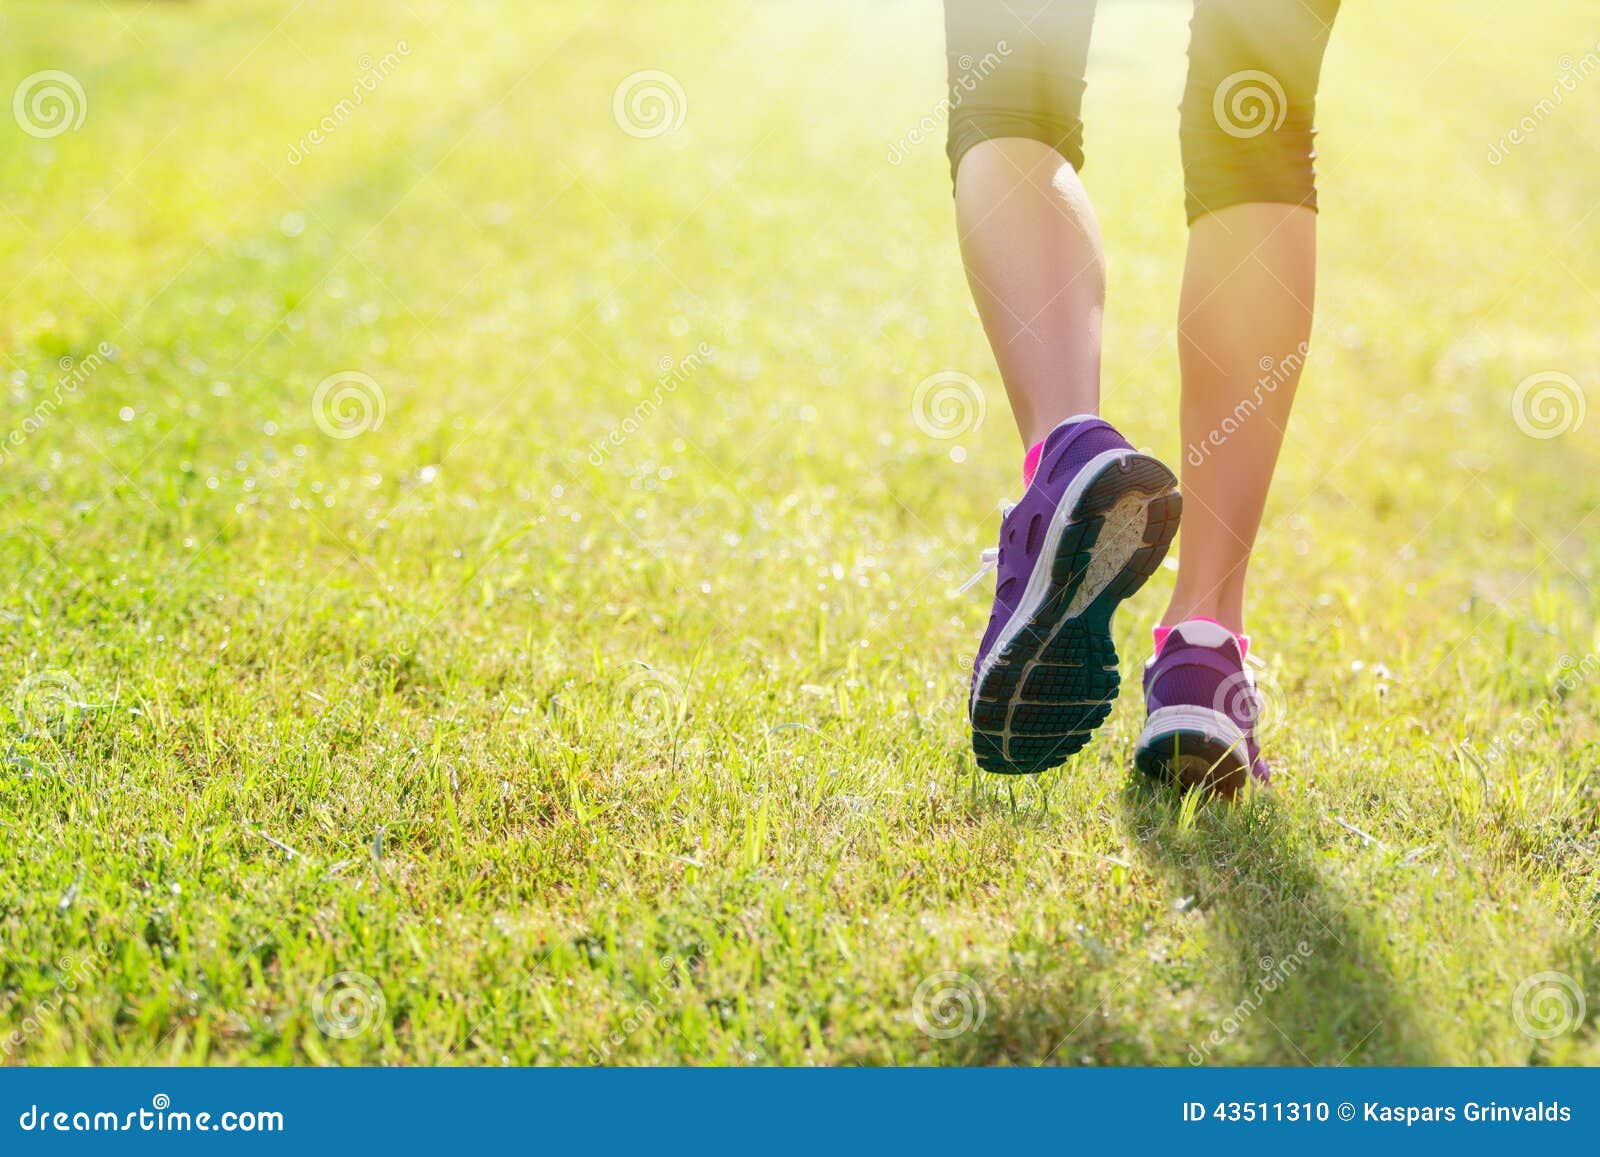 Running Shoes On Grass Stock Photo 